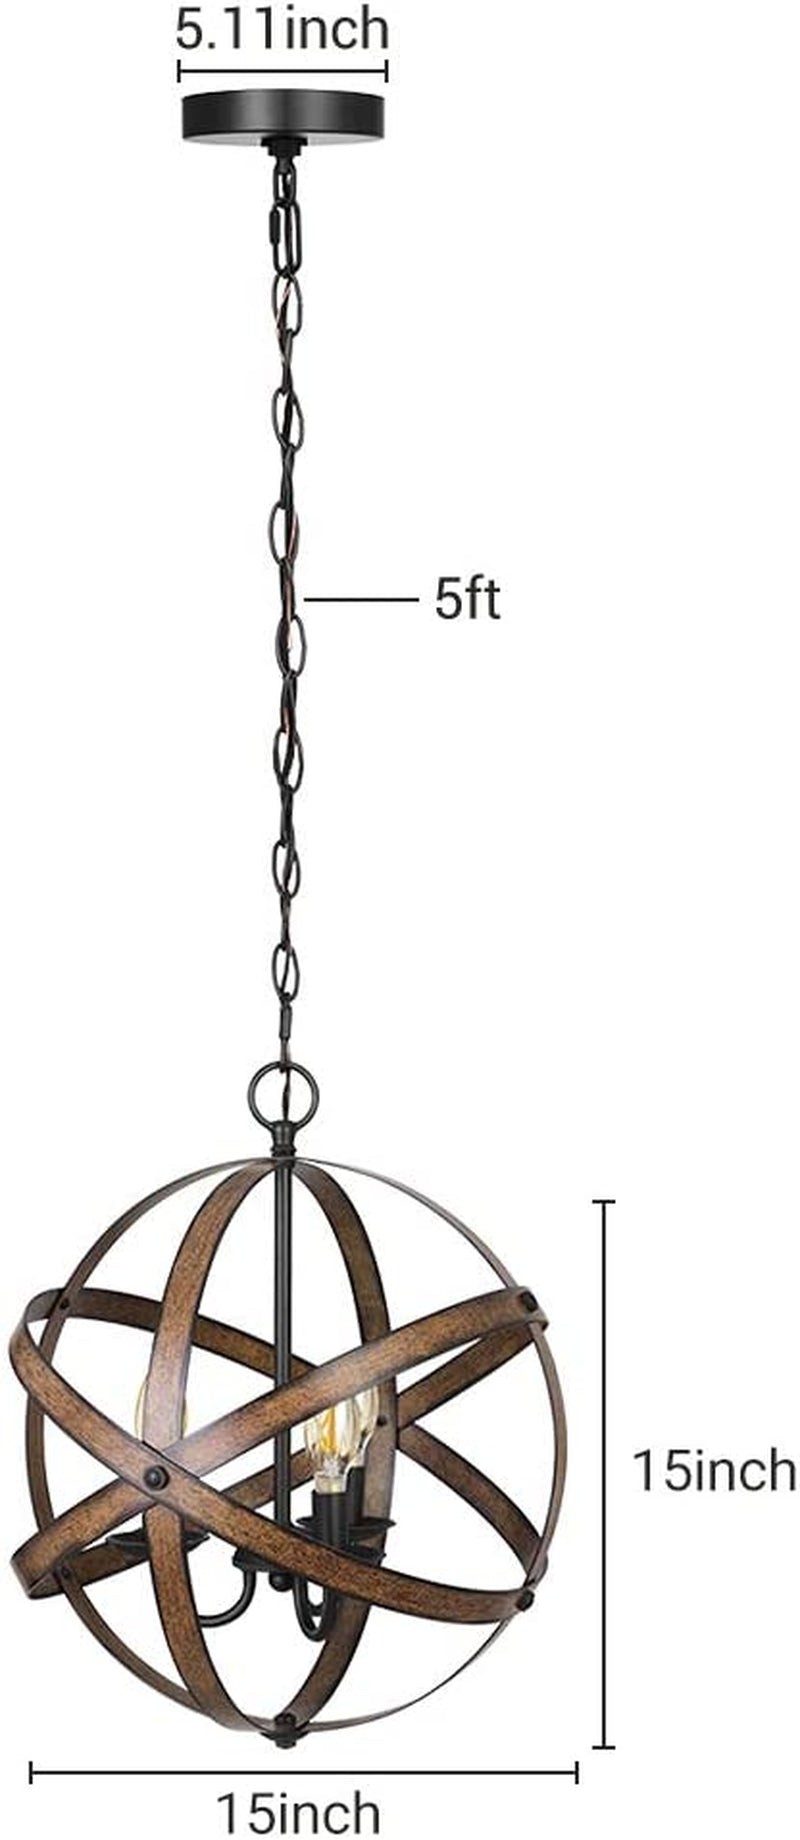 DEWENWILS Farmhouse Pendant Light, Vintage Ceiling Light Fixture 3 Light, Industrial Metal Globe, Wood Grain Paint, with Adjustable 5FT Cord, for Kitchen Island , Living Room, Entryway, Stairway